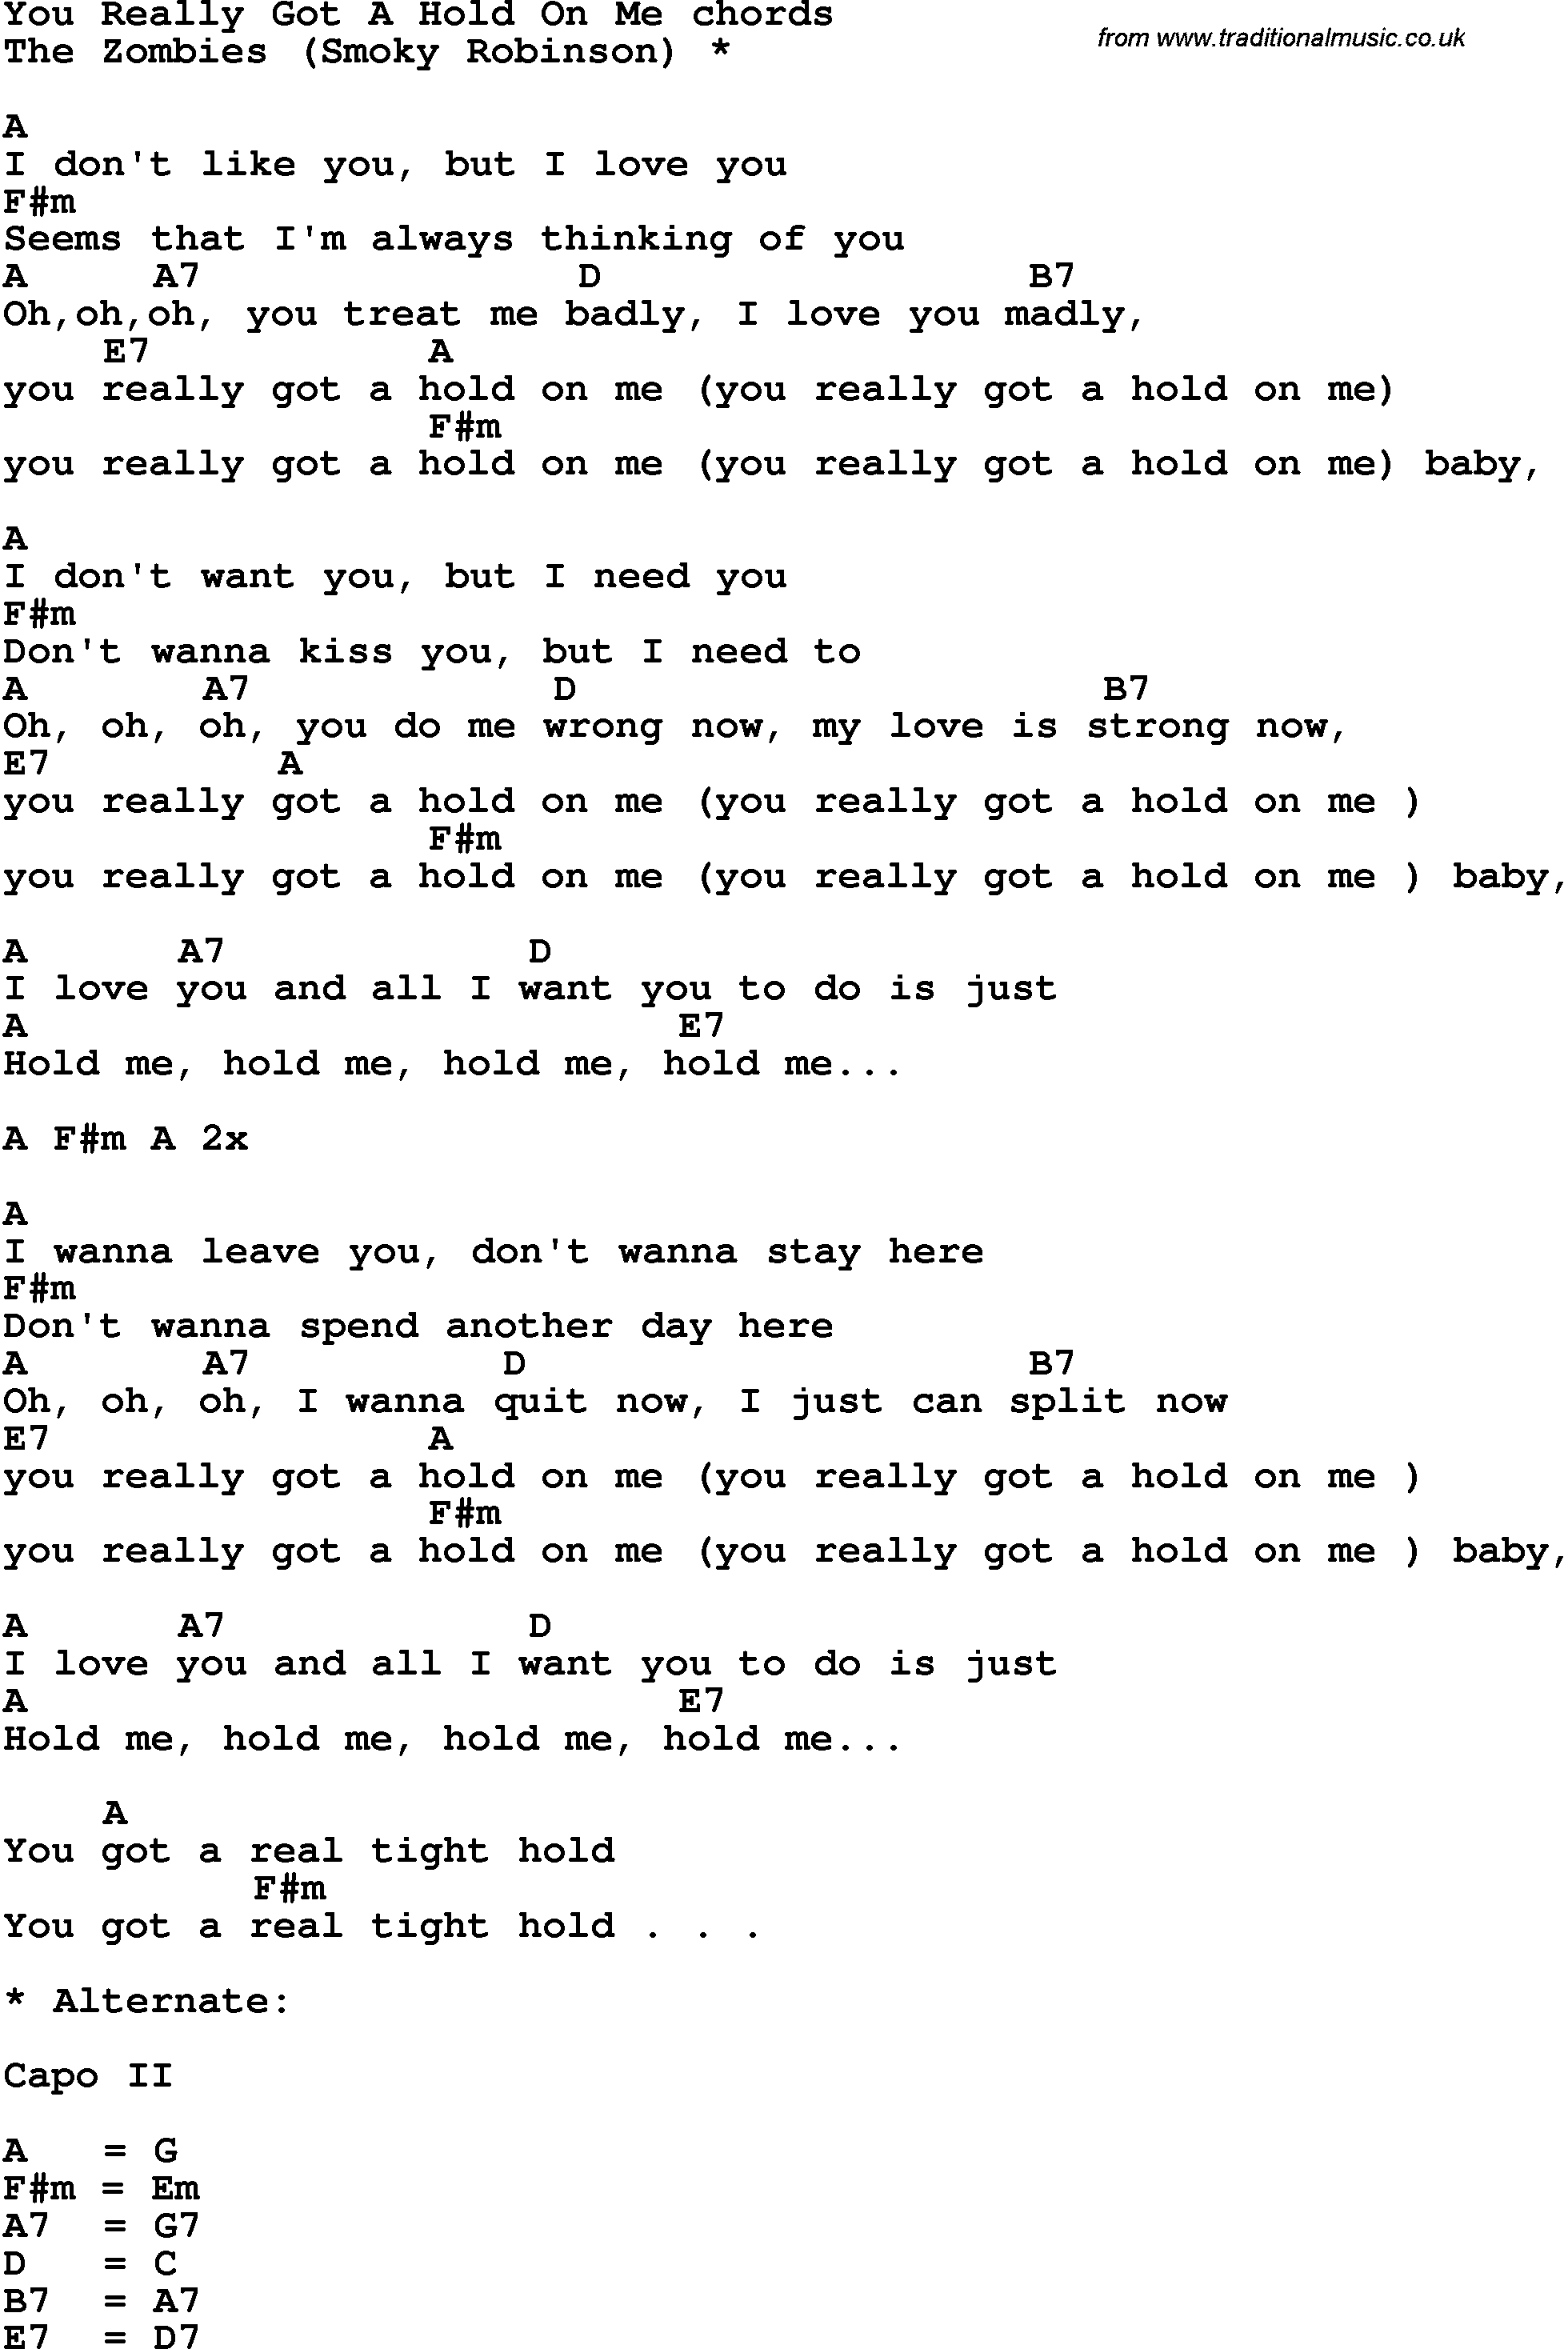 Song Lyrics with guitar chords for You Really Got A Hold On Me - Zombies